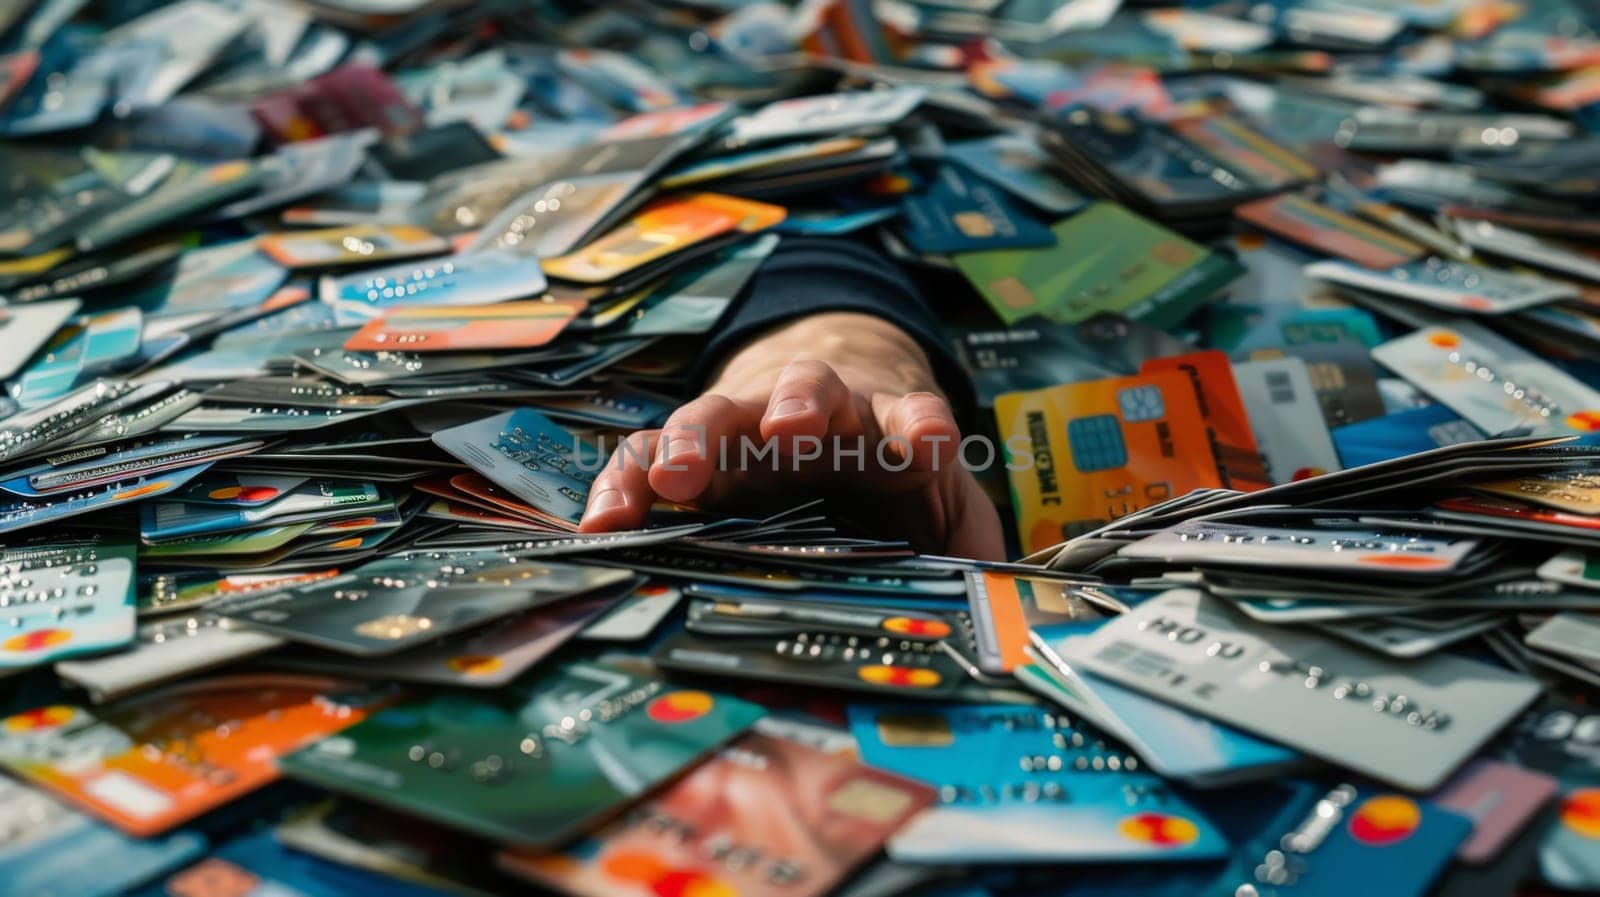 Credit bureau, a sea of credit cards, a hand is trying to reach out under the pile of credit cards.